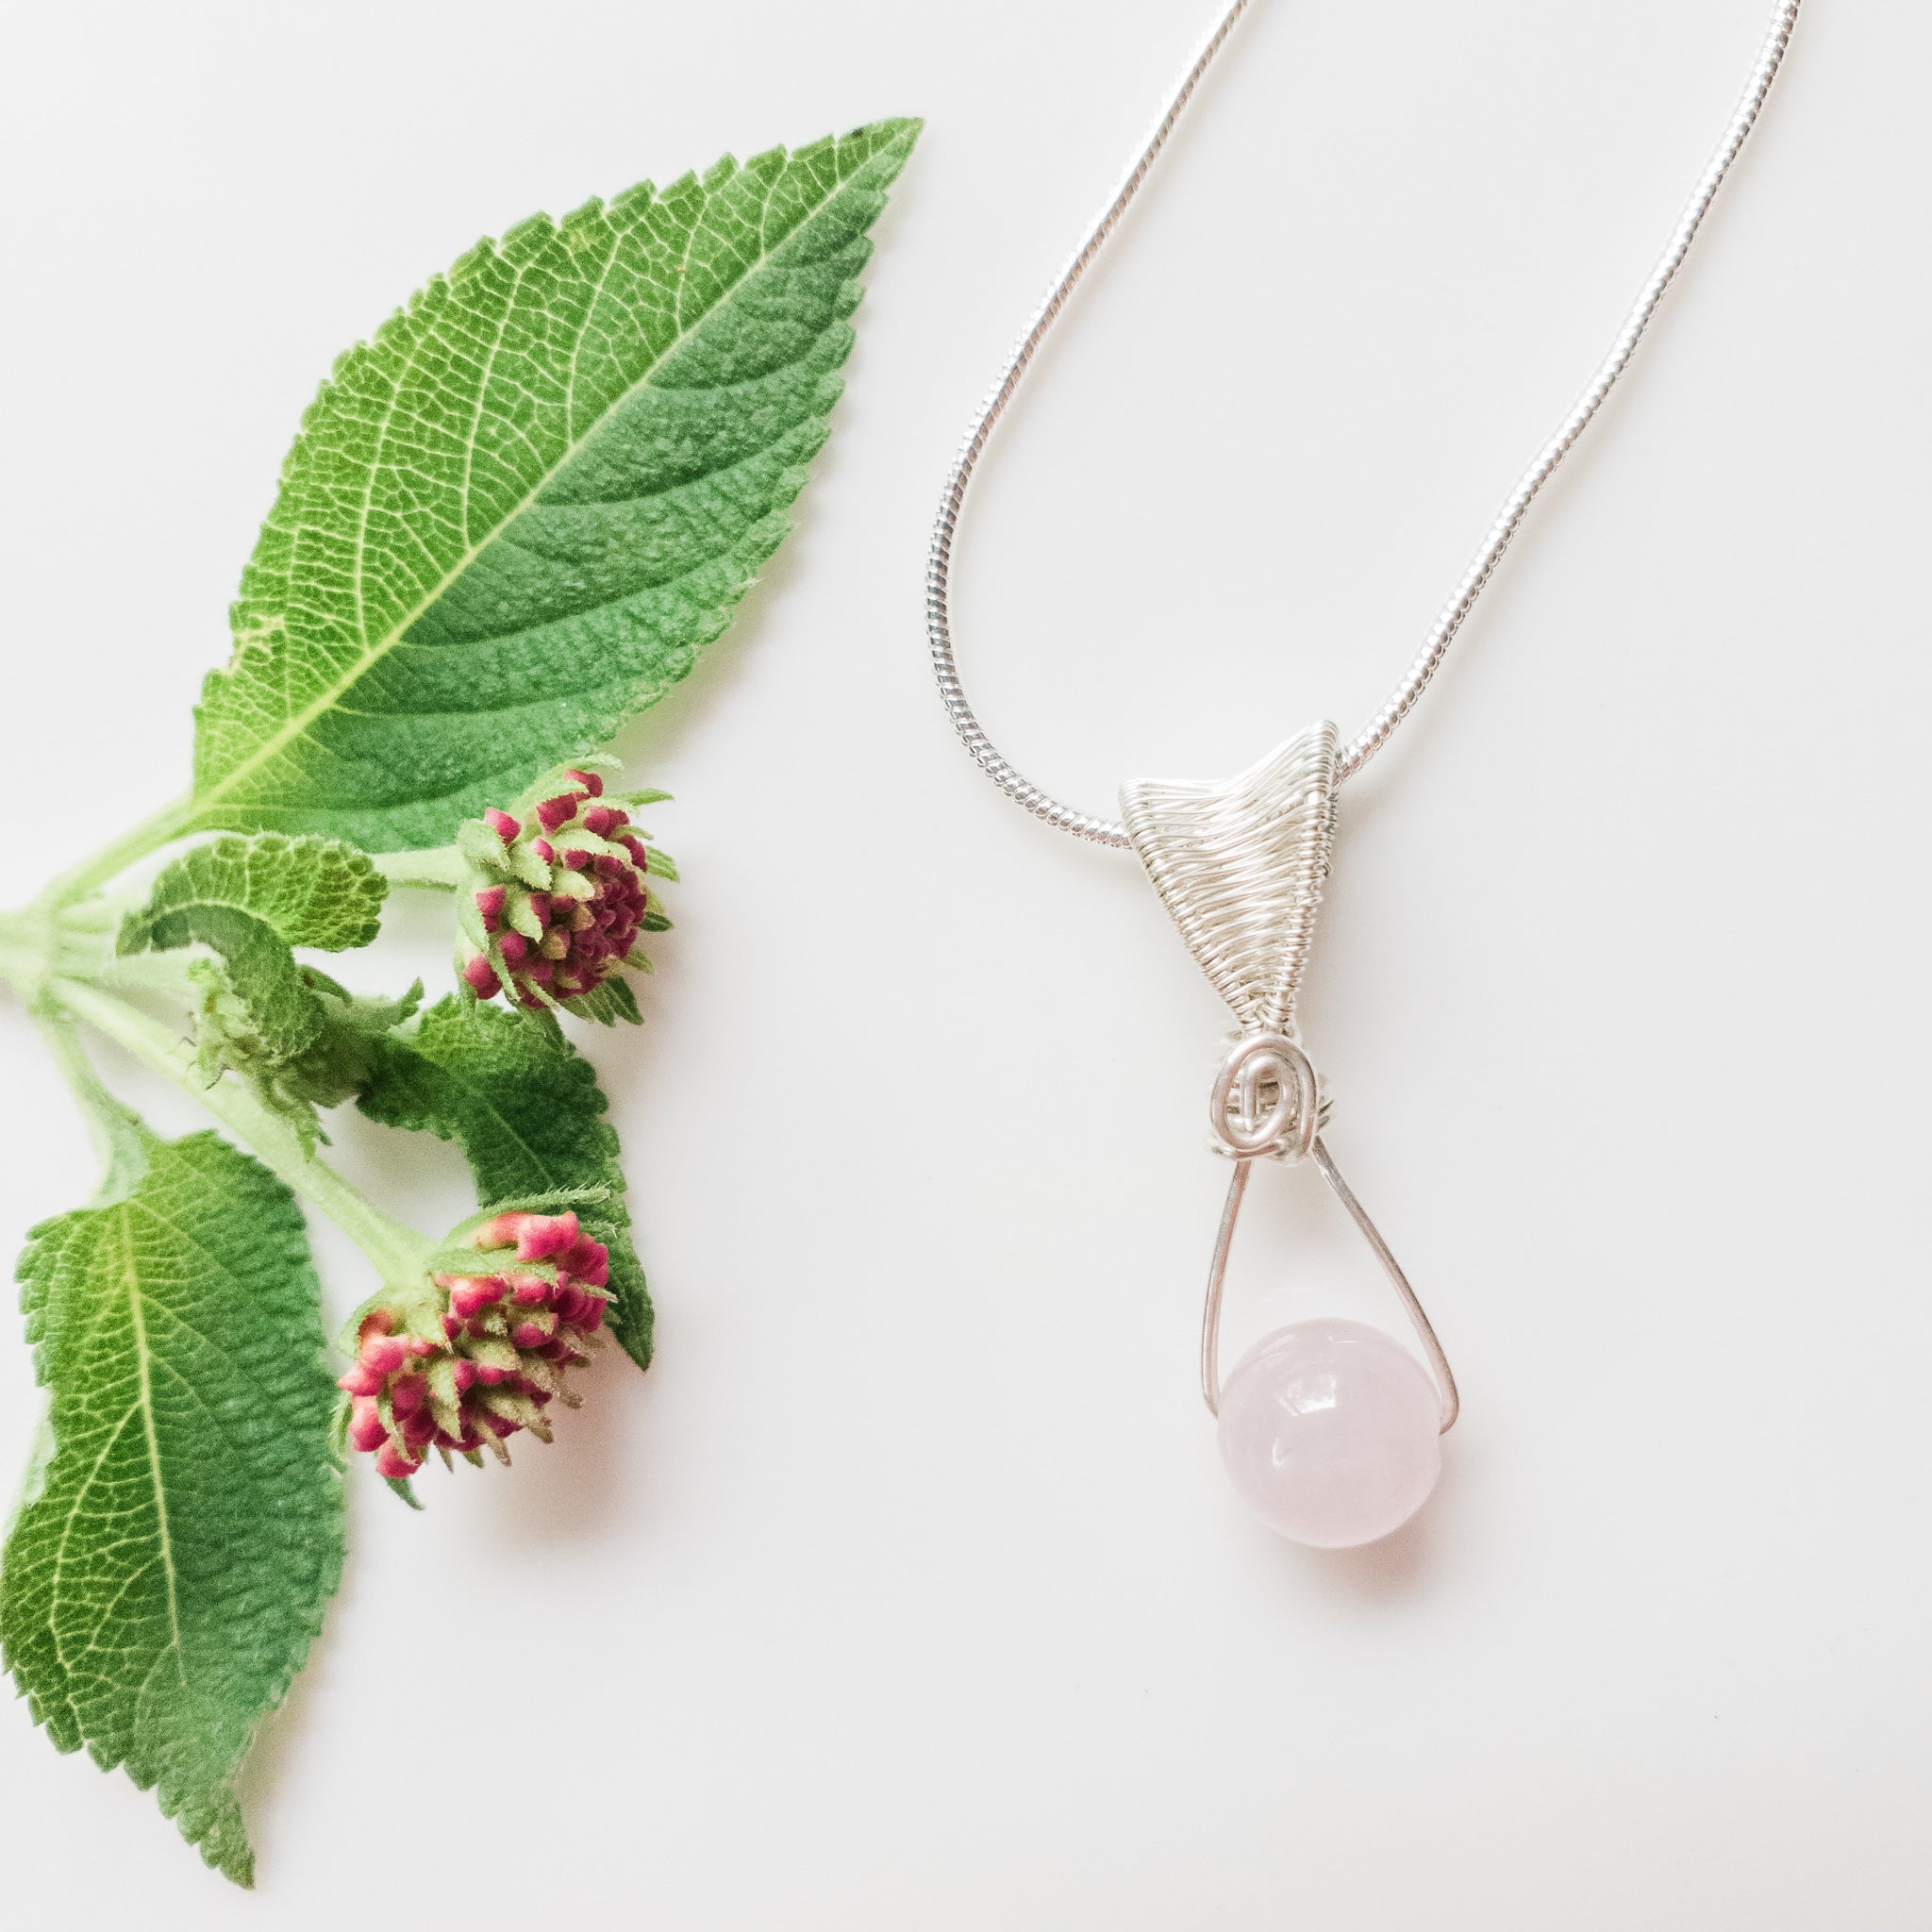 Signature Collection - Natural Rose Quartz Pendant on Sterling Silver Necklace Style B pictured up close - BellaChel Jeweler